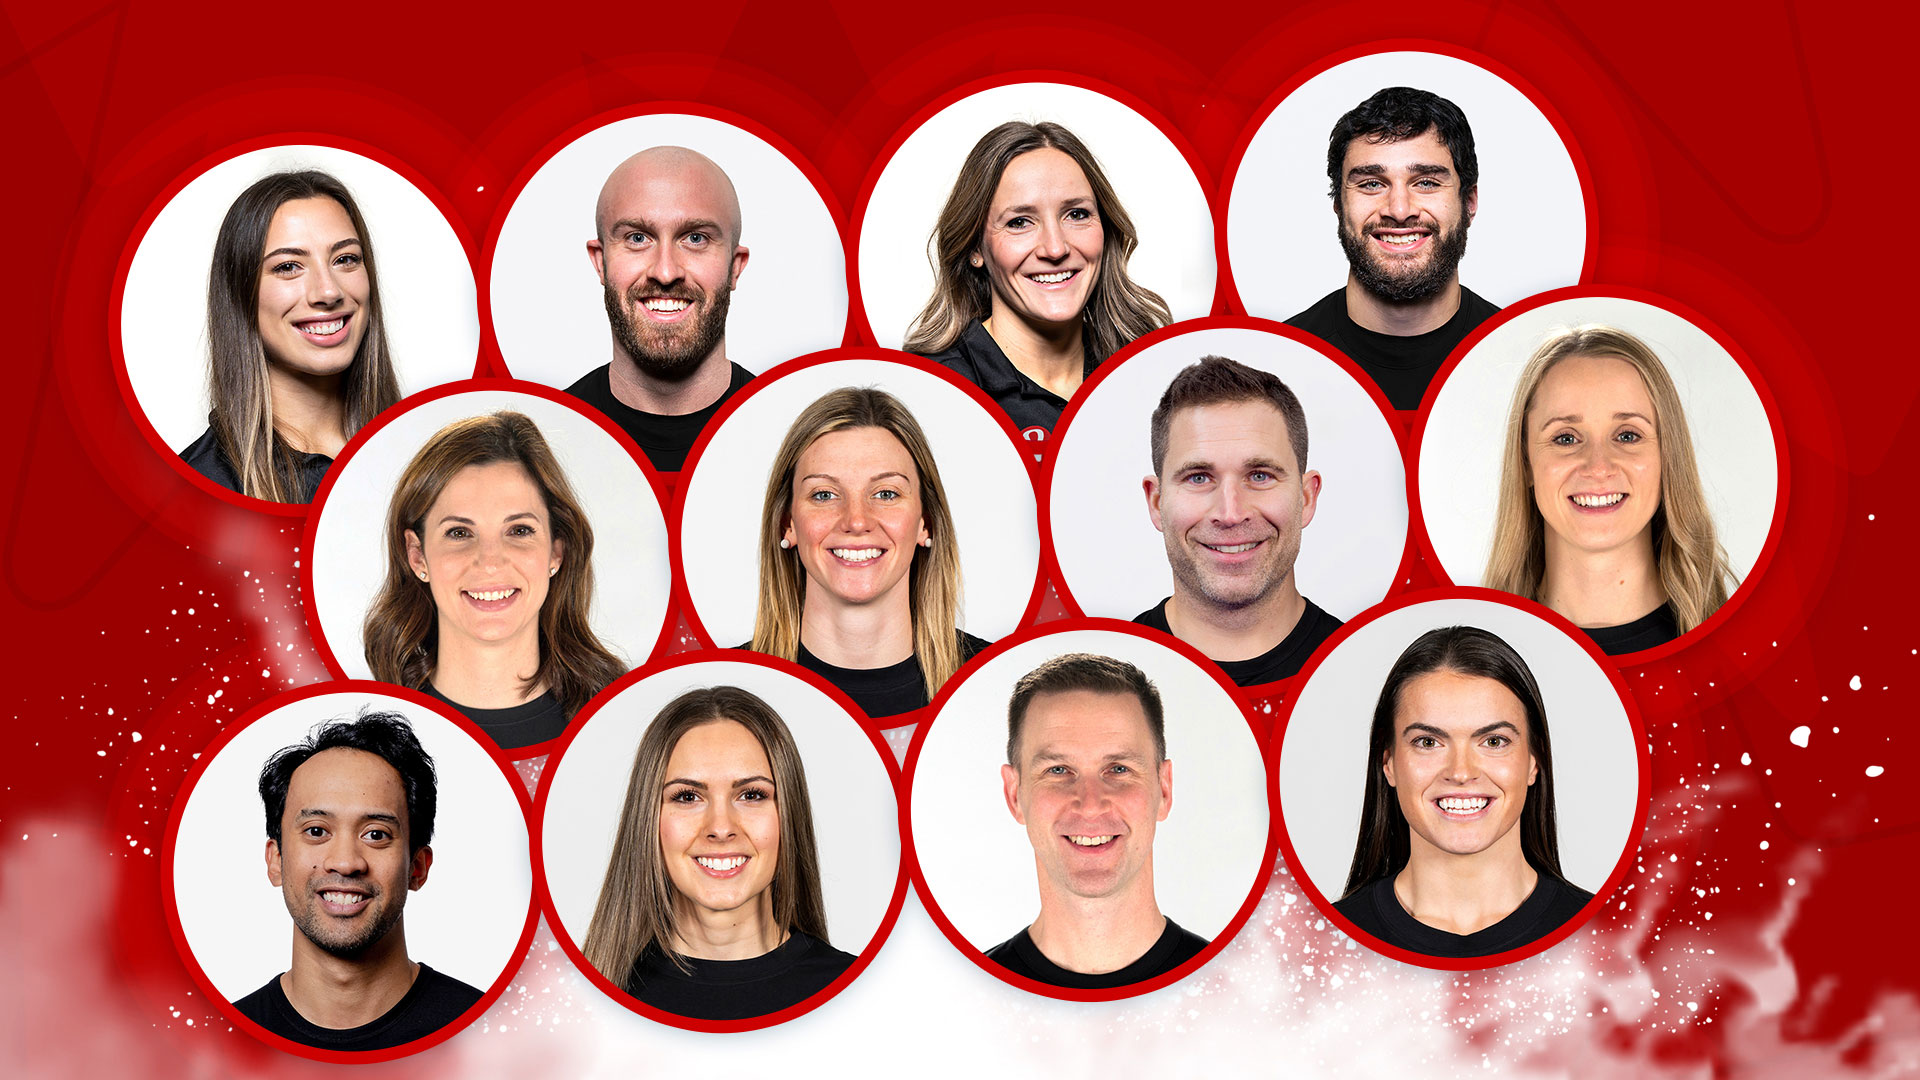 Team Canada includes thirteen Smith students and alumni.